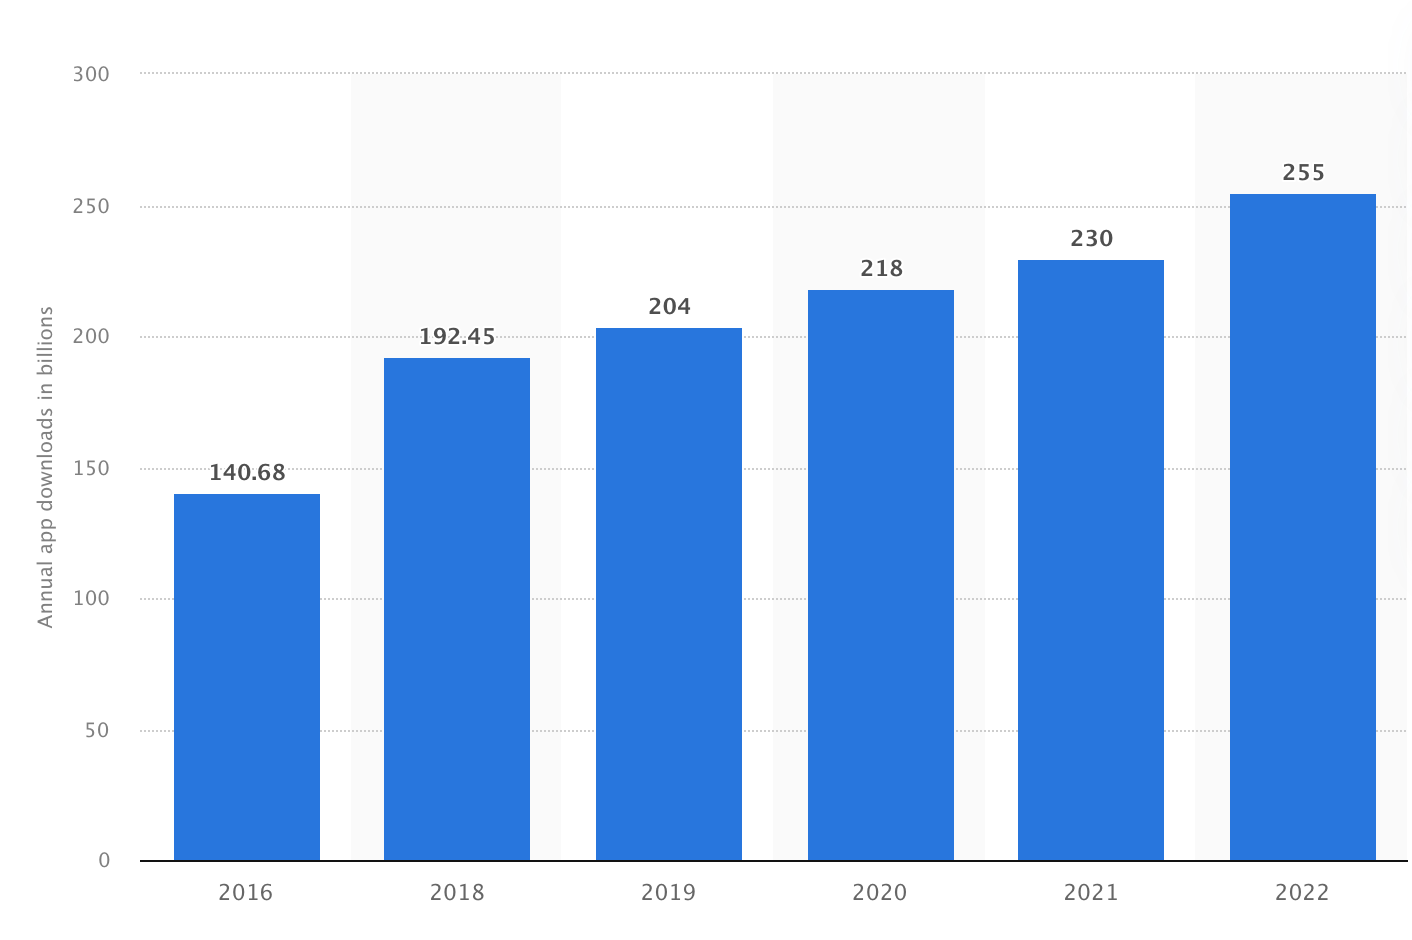 Number of mobile app downloads worldwide from 2016 to 2022